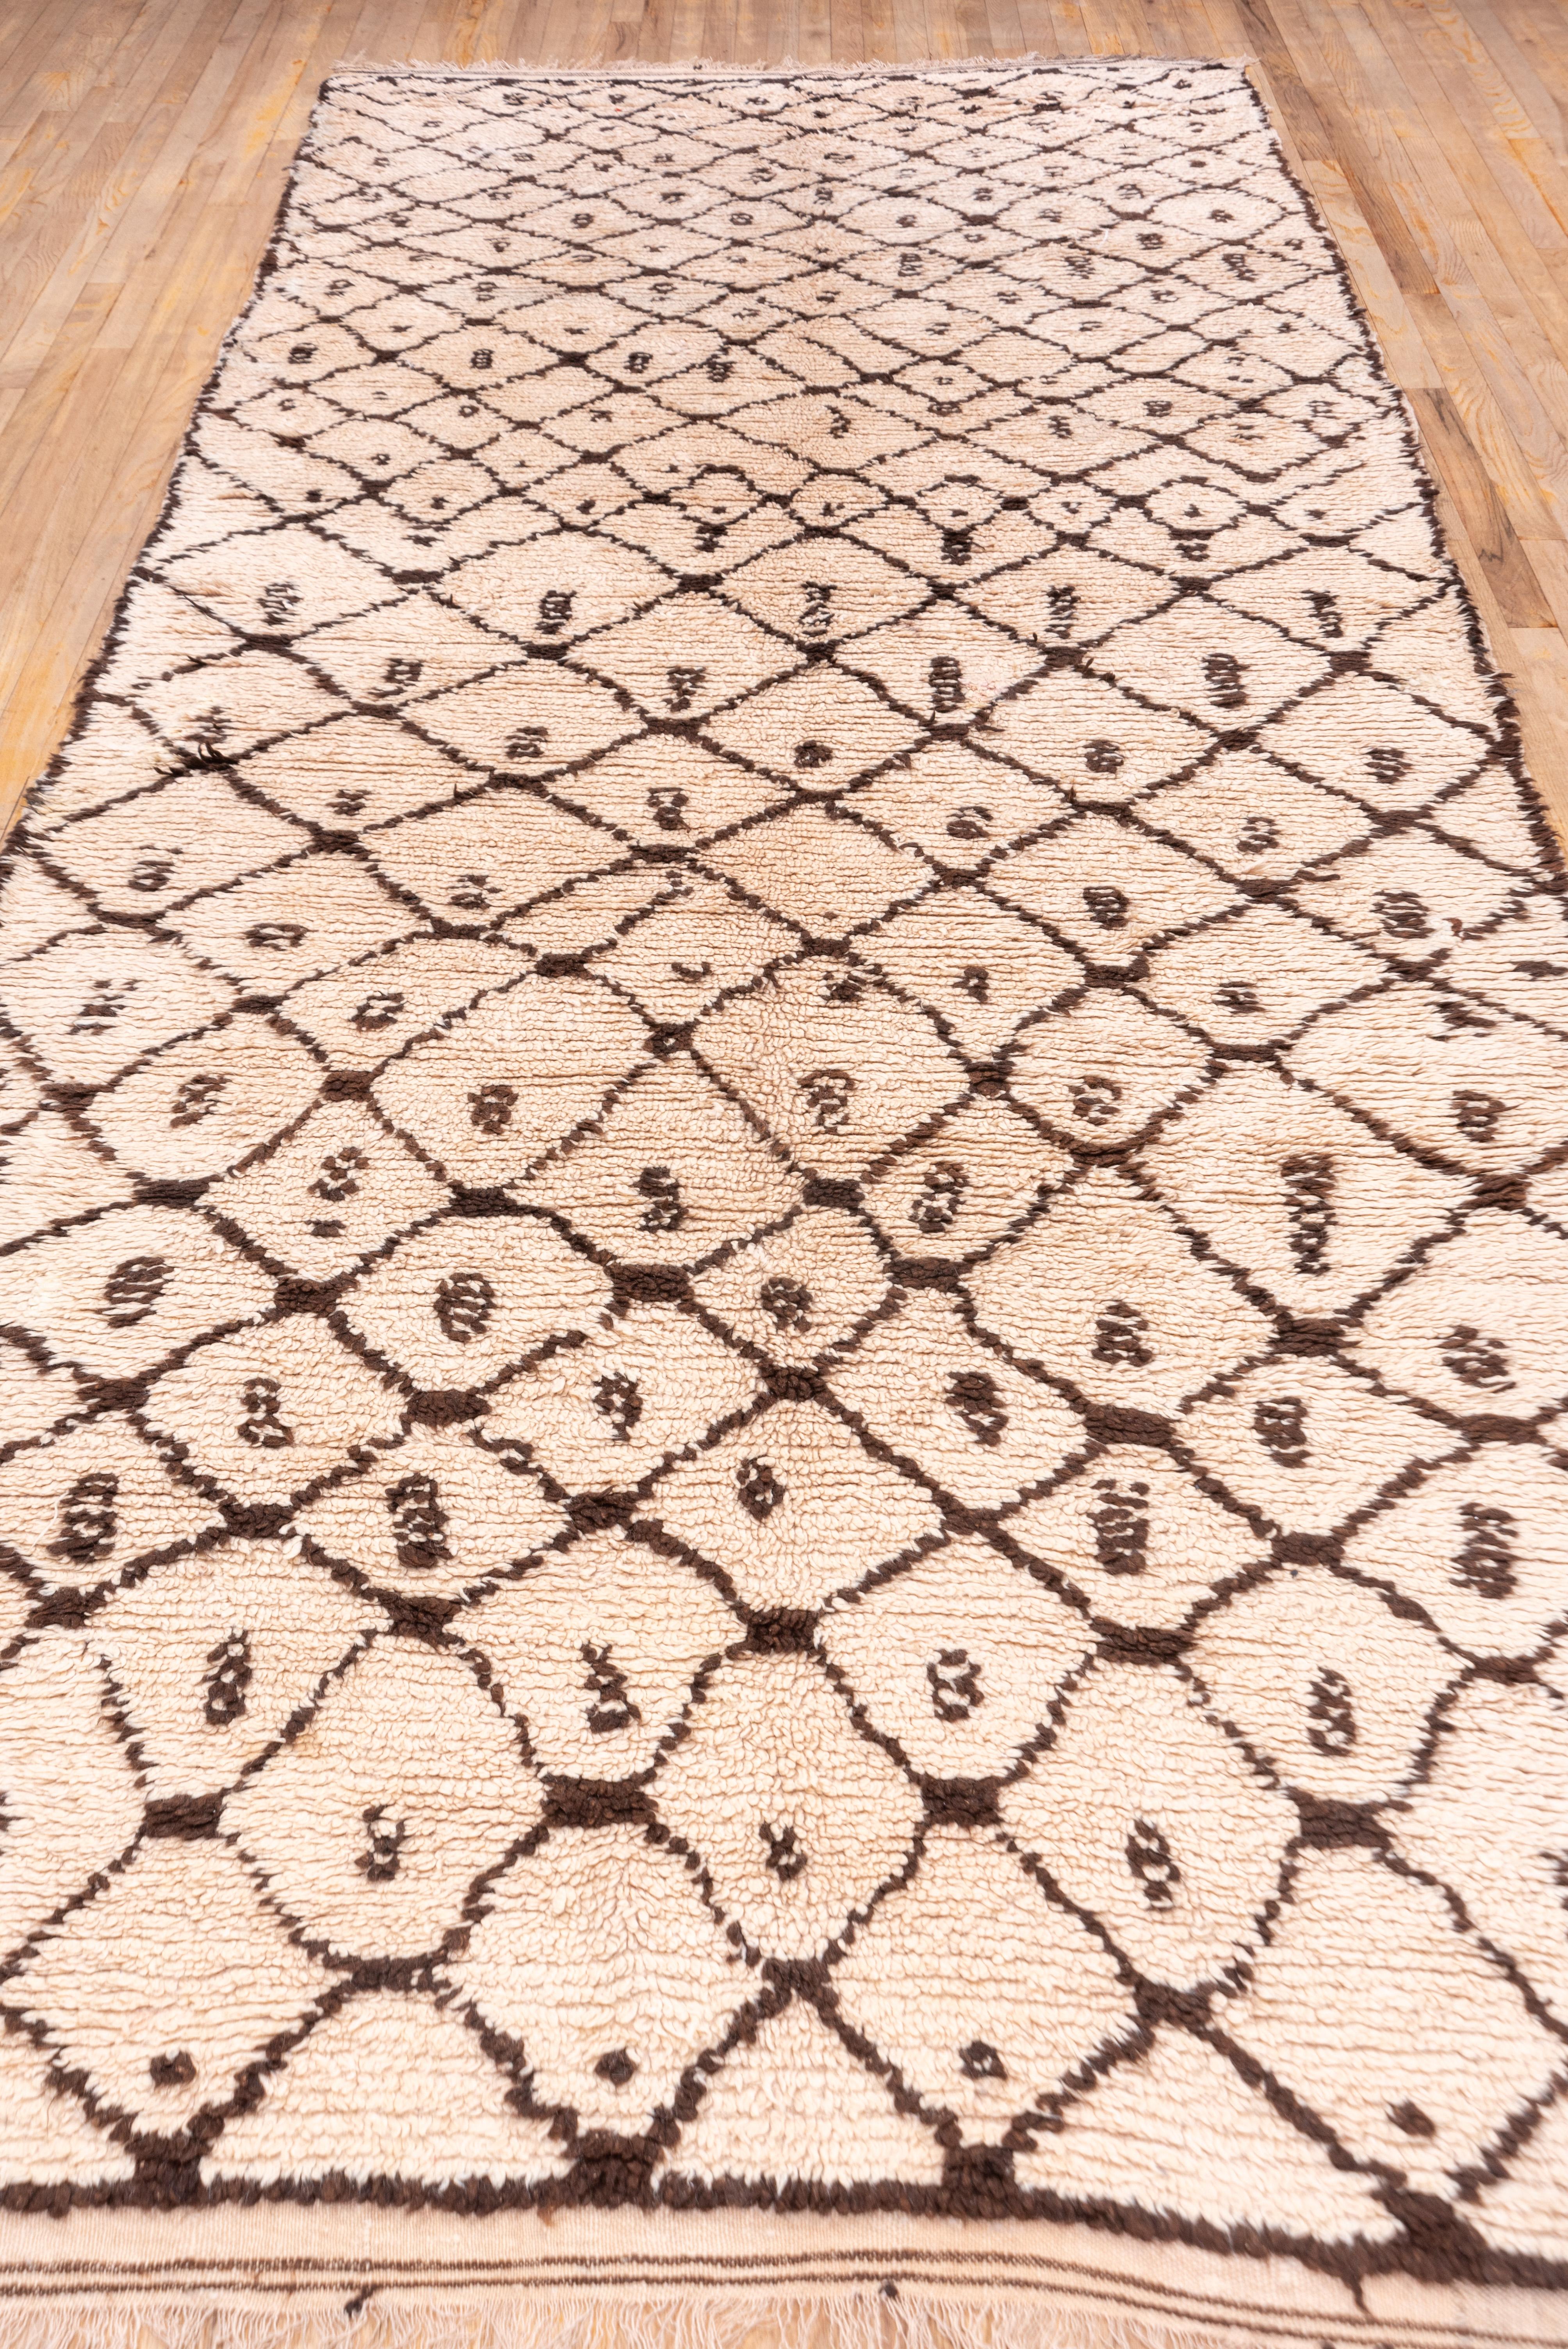 Tribal Vintage Moroccan Azilal Carpet, Ivory and Brown Field, circa 1940s For Sale